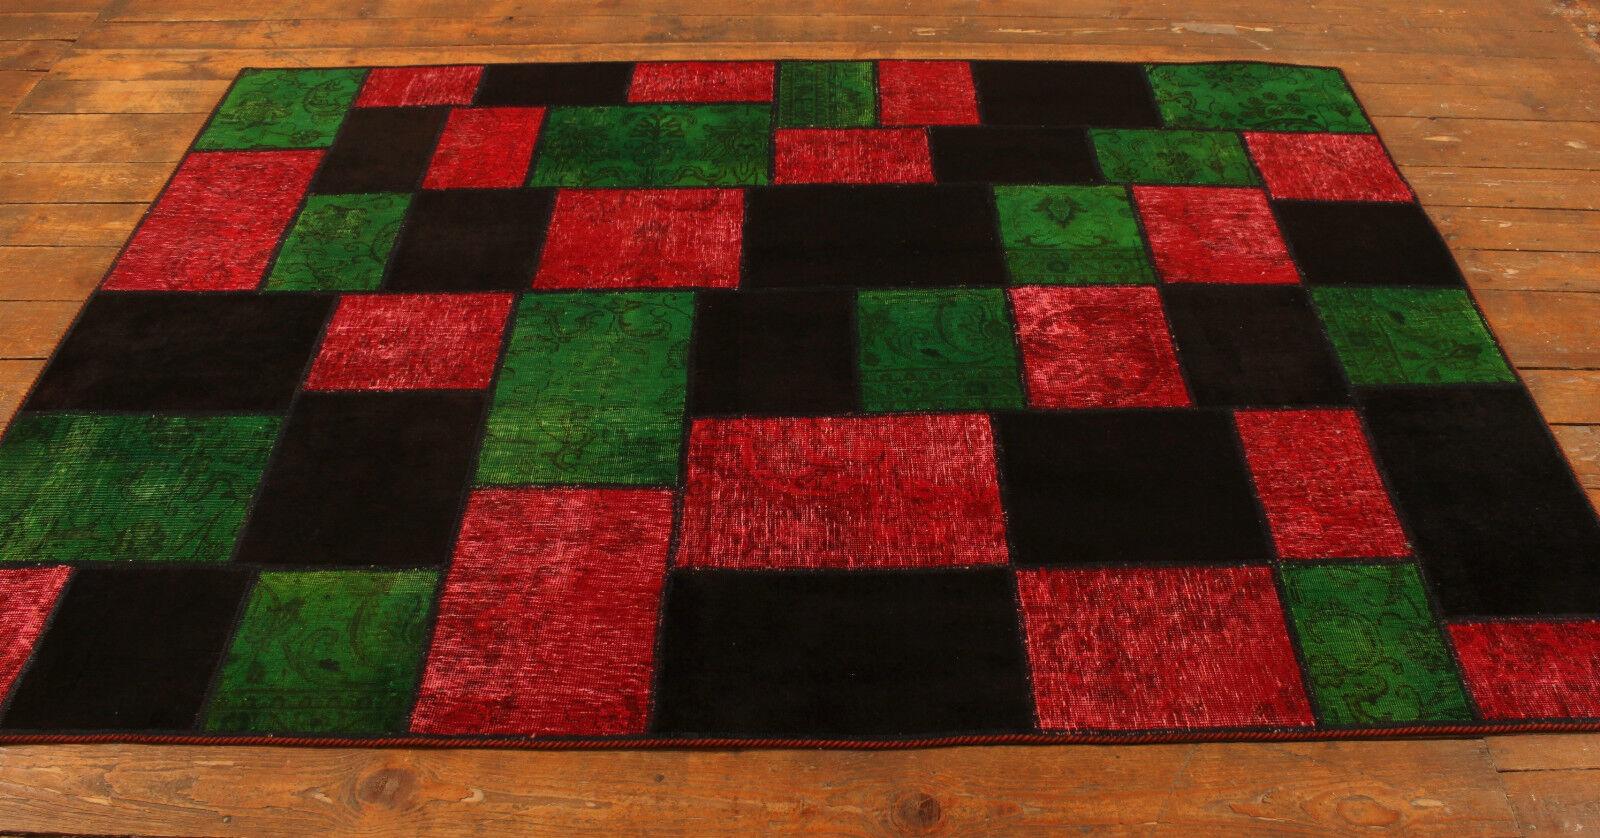 Handmade Vintage Persian Style Patchwork Overdyed Rug 5.7' x 7.9', 1970s - 1T39 For Sale 1